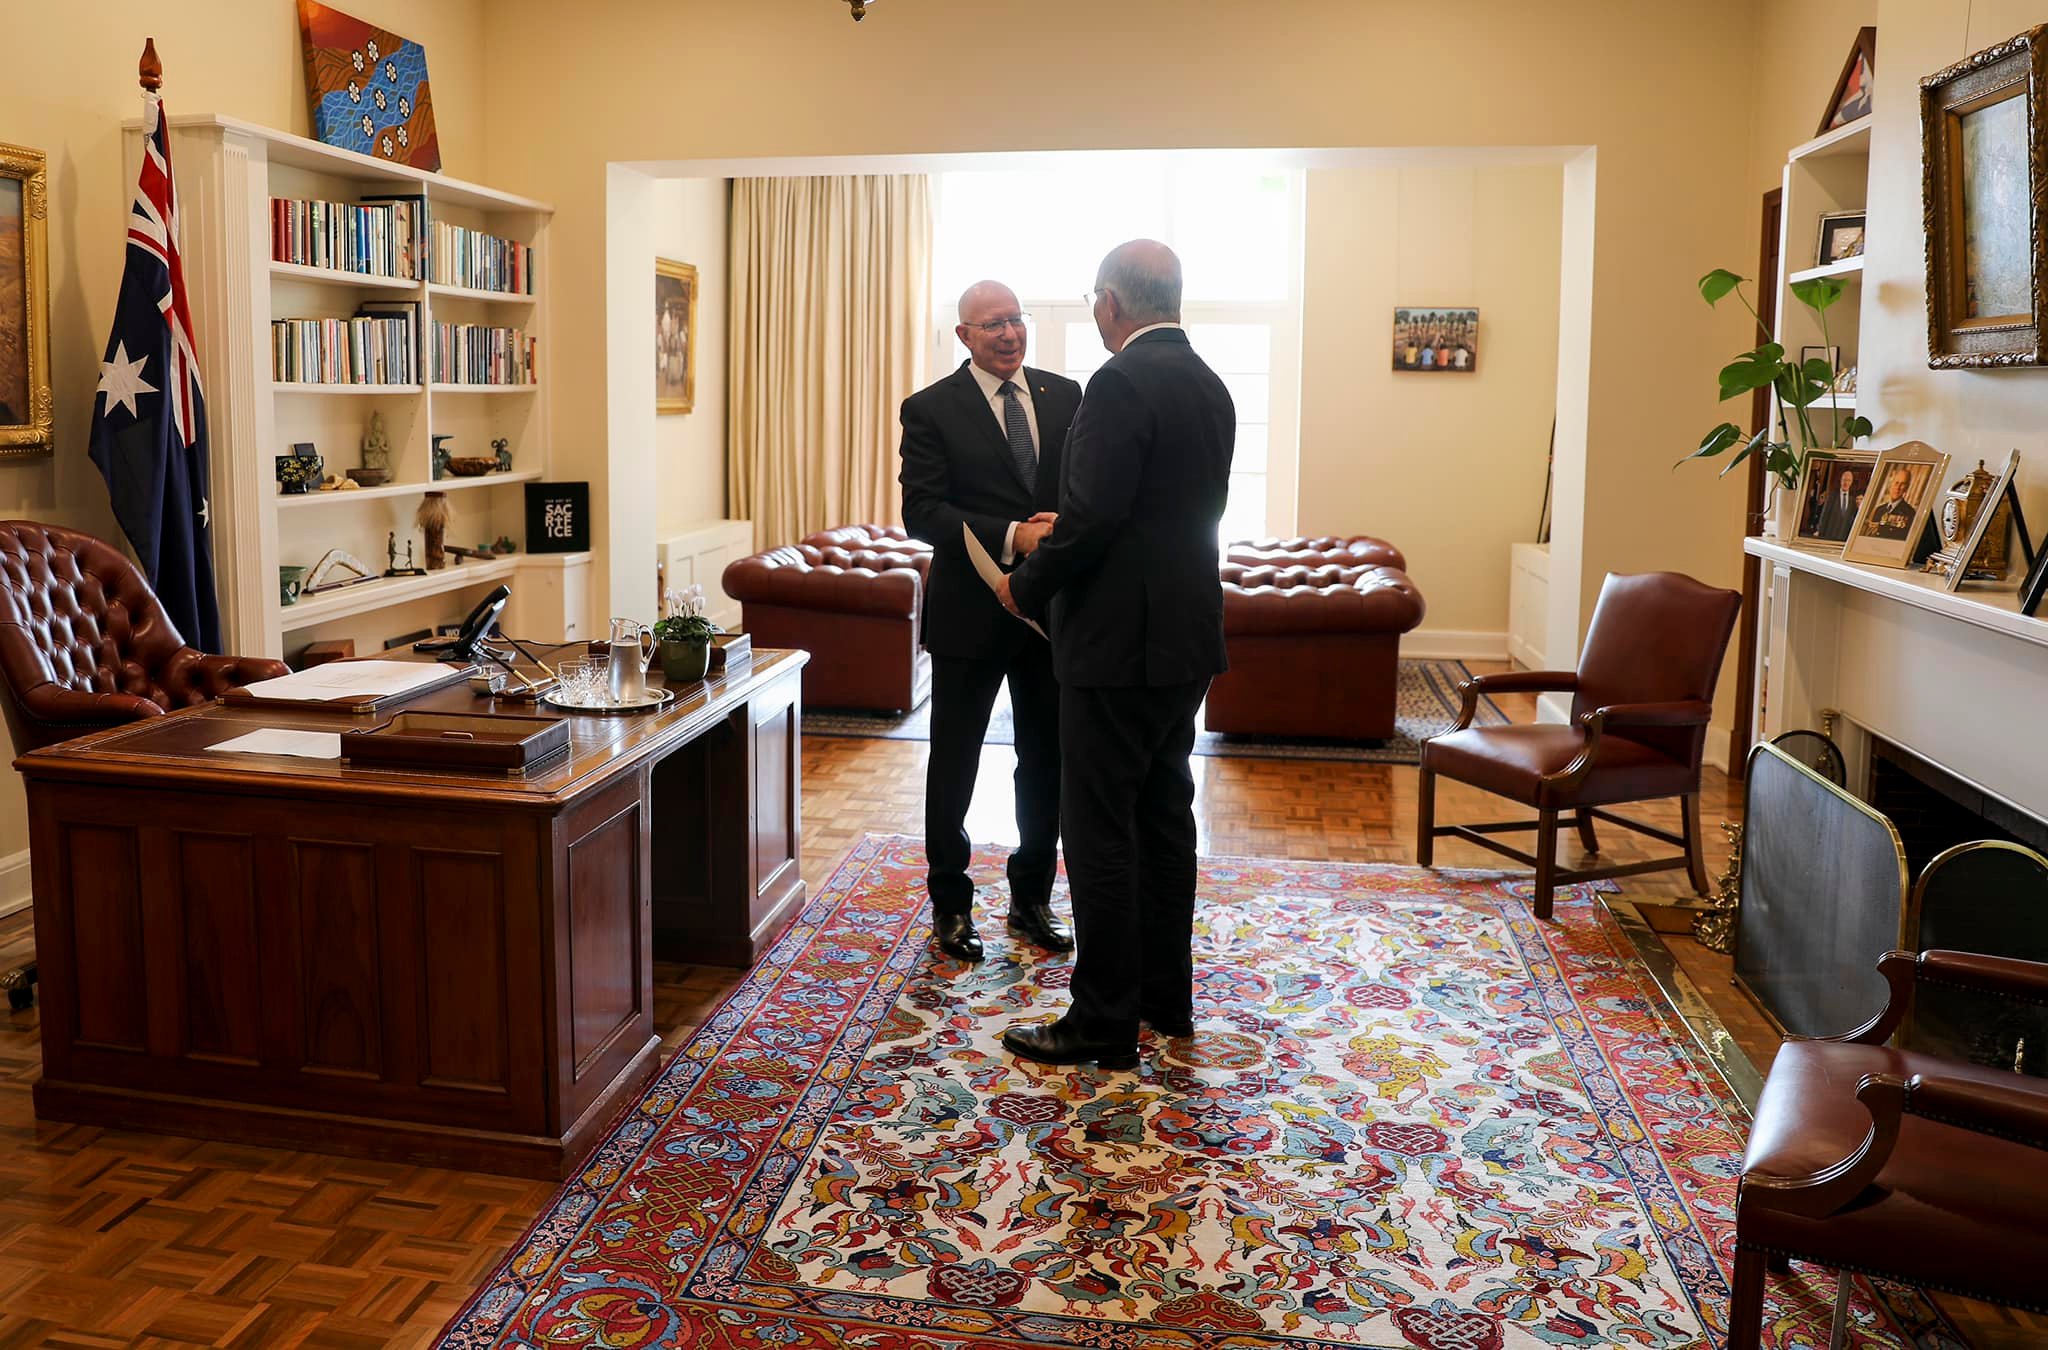 Governor-General David Hurley and Prime Minister Scott Morrison shake hands in the Governor-General's study